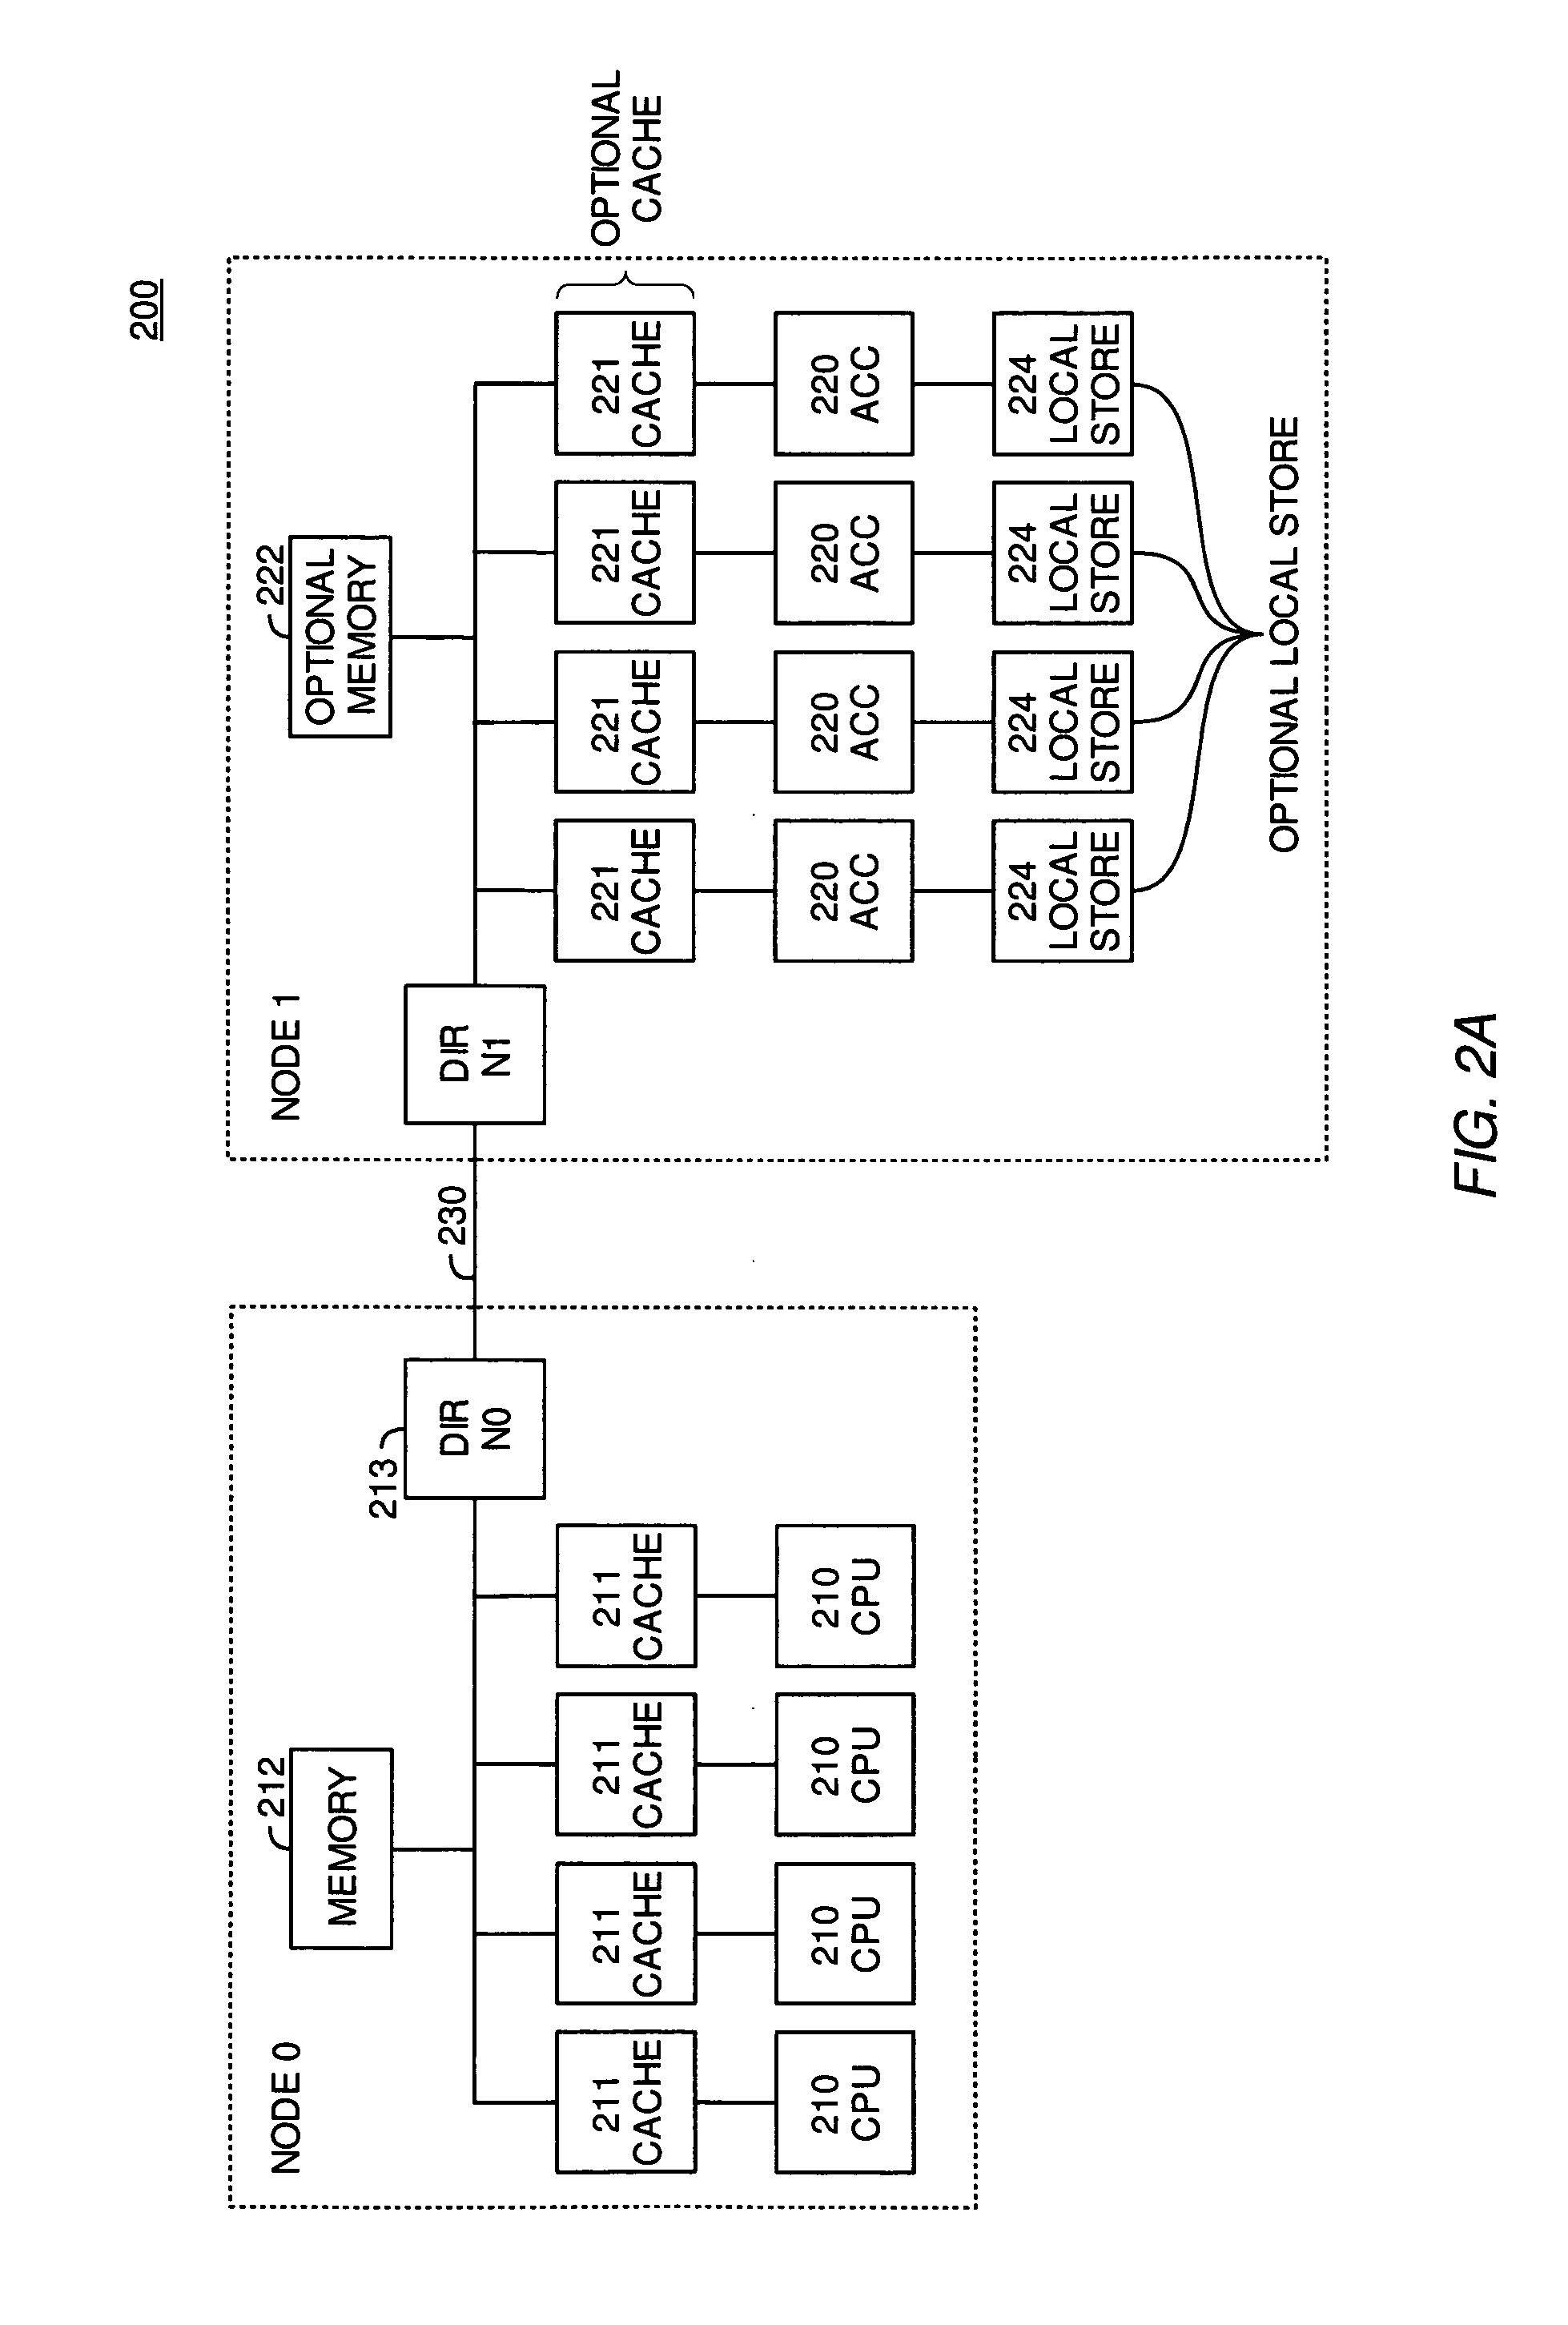 Low-cost cache coherency for accelerators